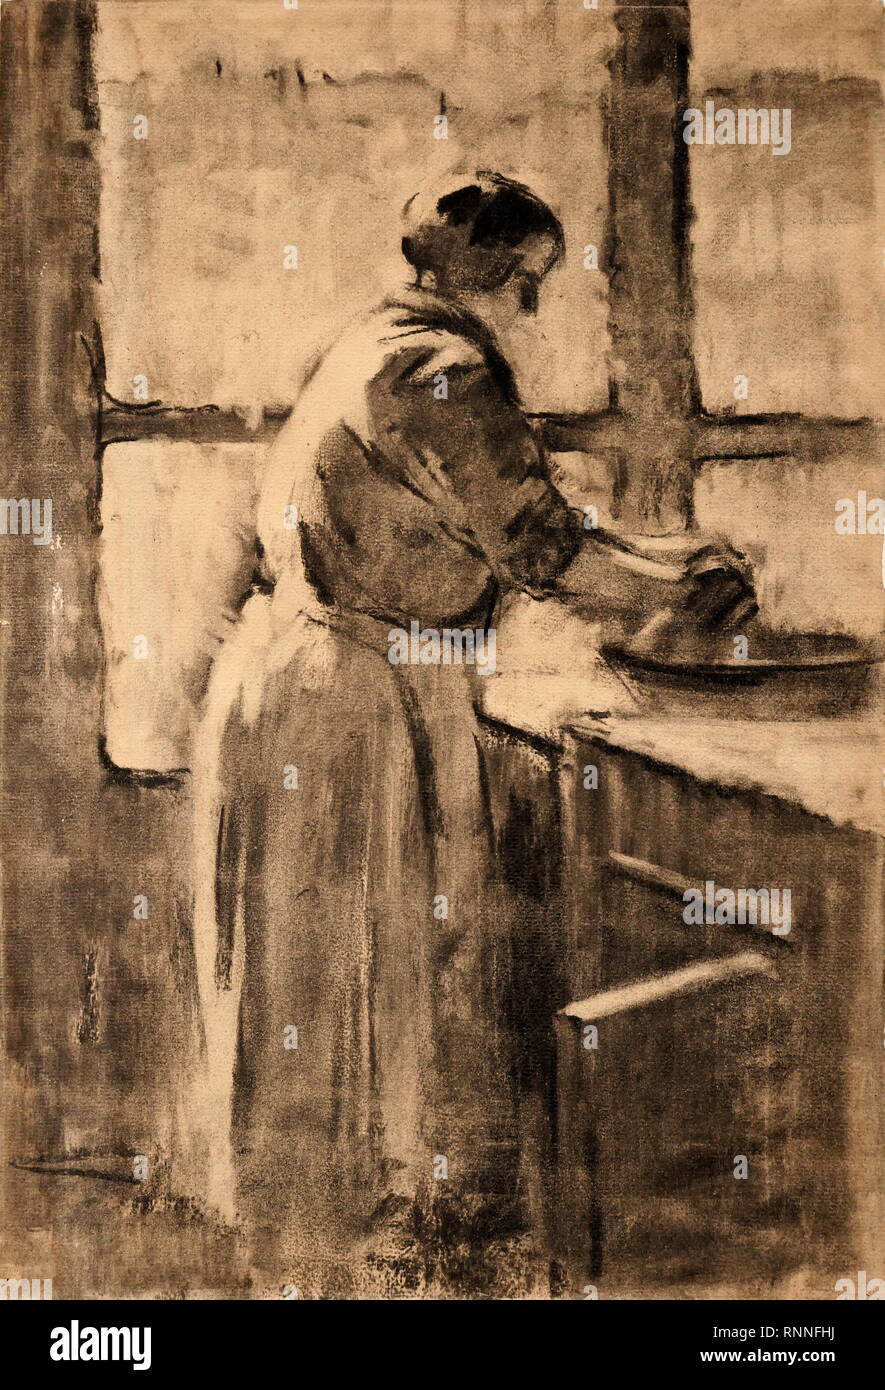 AJAXNETPHOTO. 2019. ENGLAND. - EARLY 20TH CENTURY ART - UNSIGNED ARTWORK OF WOMAN WITH APRON PERHAPS MAKING PASTRY (INDISTINCT); AQUATINT AND CHARCOAL OR GRAPHITE. PHOTO:© IN THIS DIGITAL COPY OF THE ORIGINAL WORK/AJAX NEWS & FEATURE SERVICE. SOURCE: PRIVATE COLLECTION. REF:GX191702 20006 Stock Photo